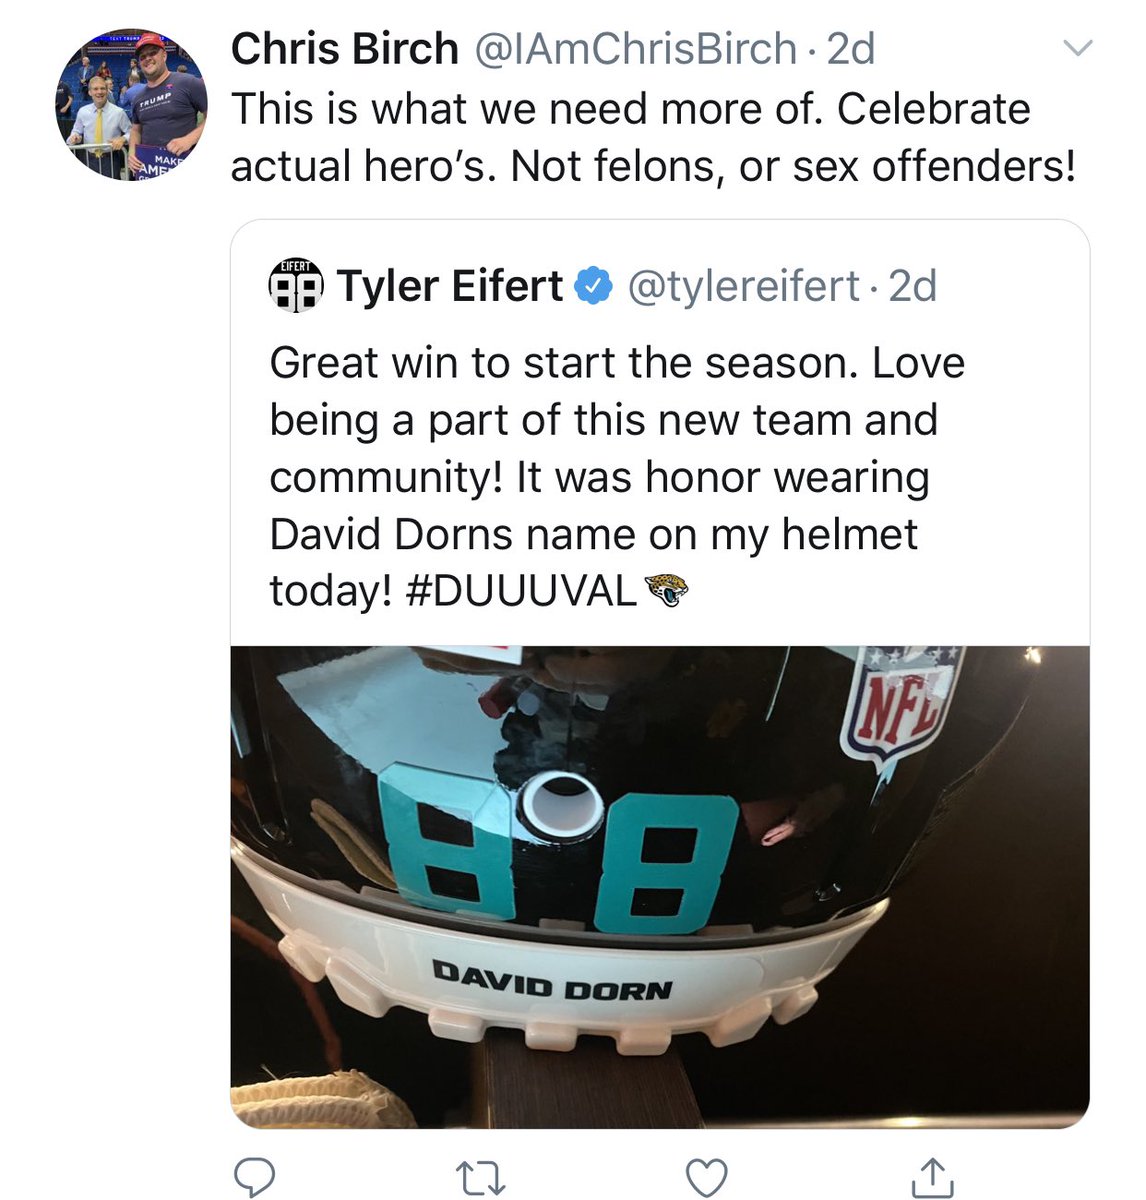 On Twitter, reaction to Tyler Eifert’s helmet decal was seen as support for  #AllLivesMatter,  #BlueLivesMatter and a denouncement of kneeling and the “felons” honored by other NFL players on their helmets.